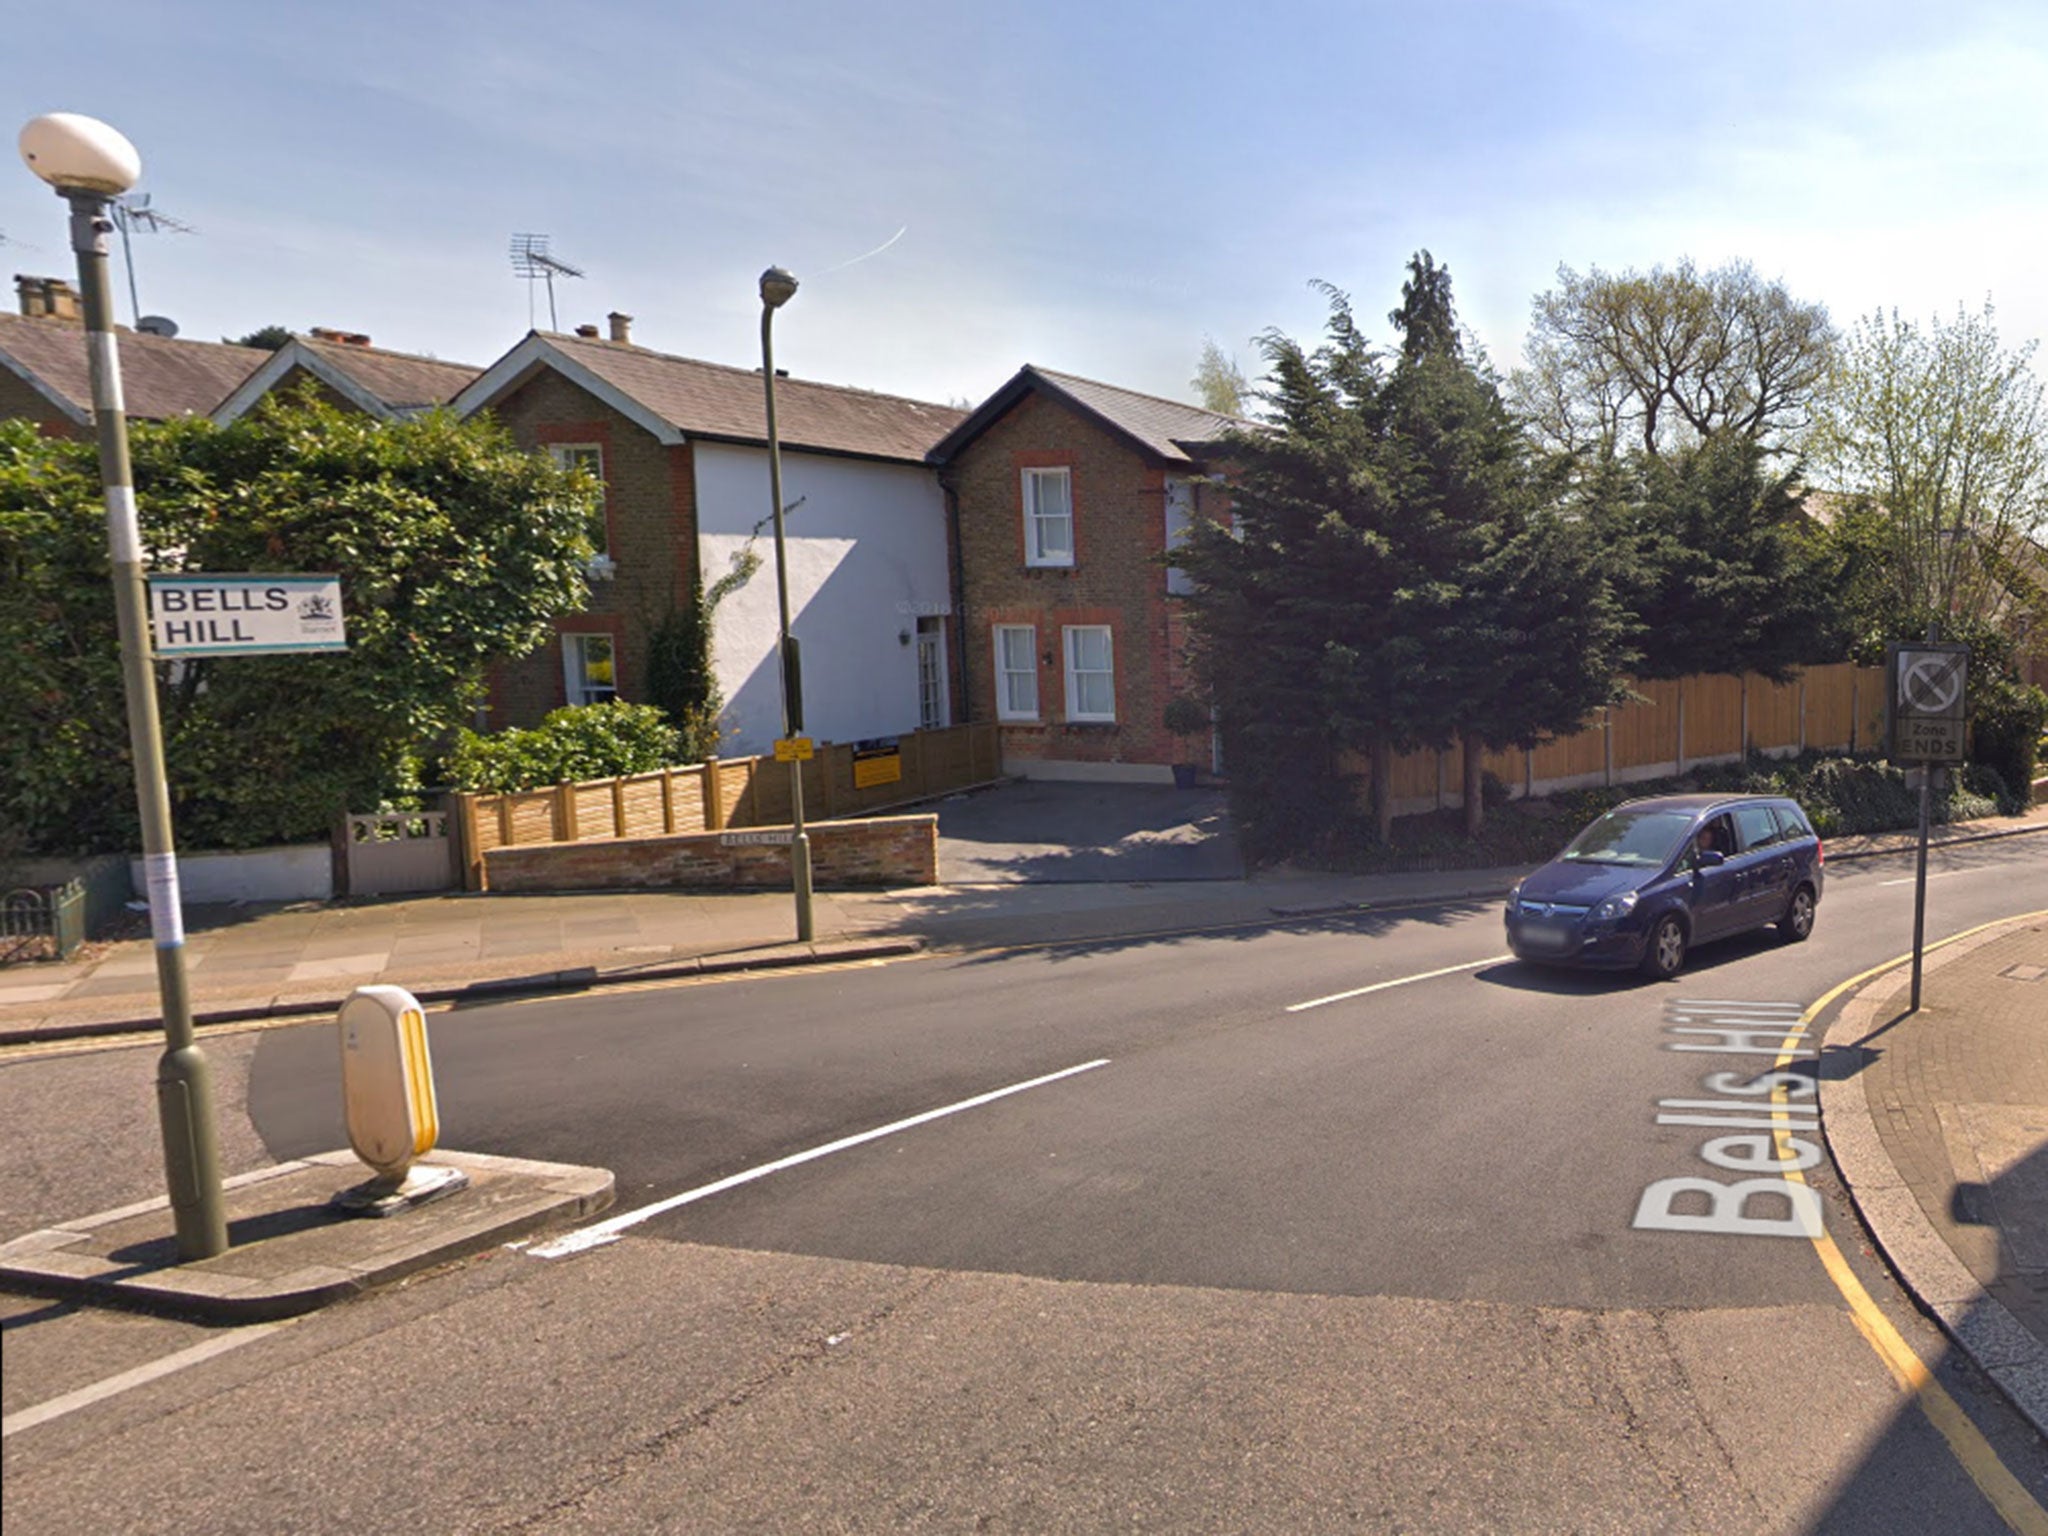 The woman's home was burgled in Bells Hill, Barnet